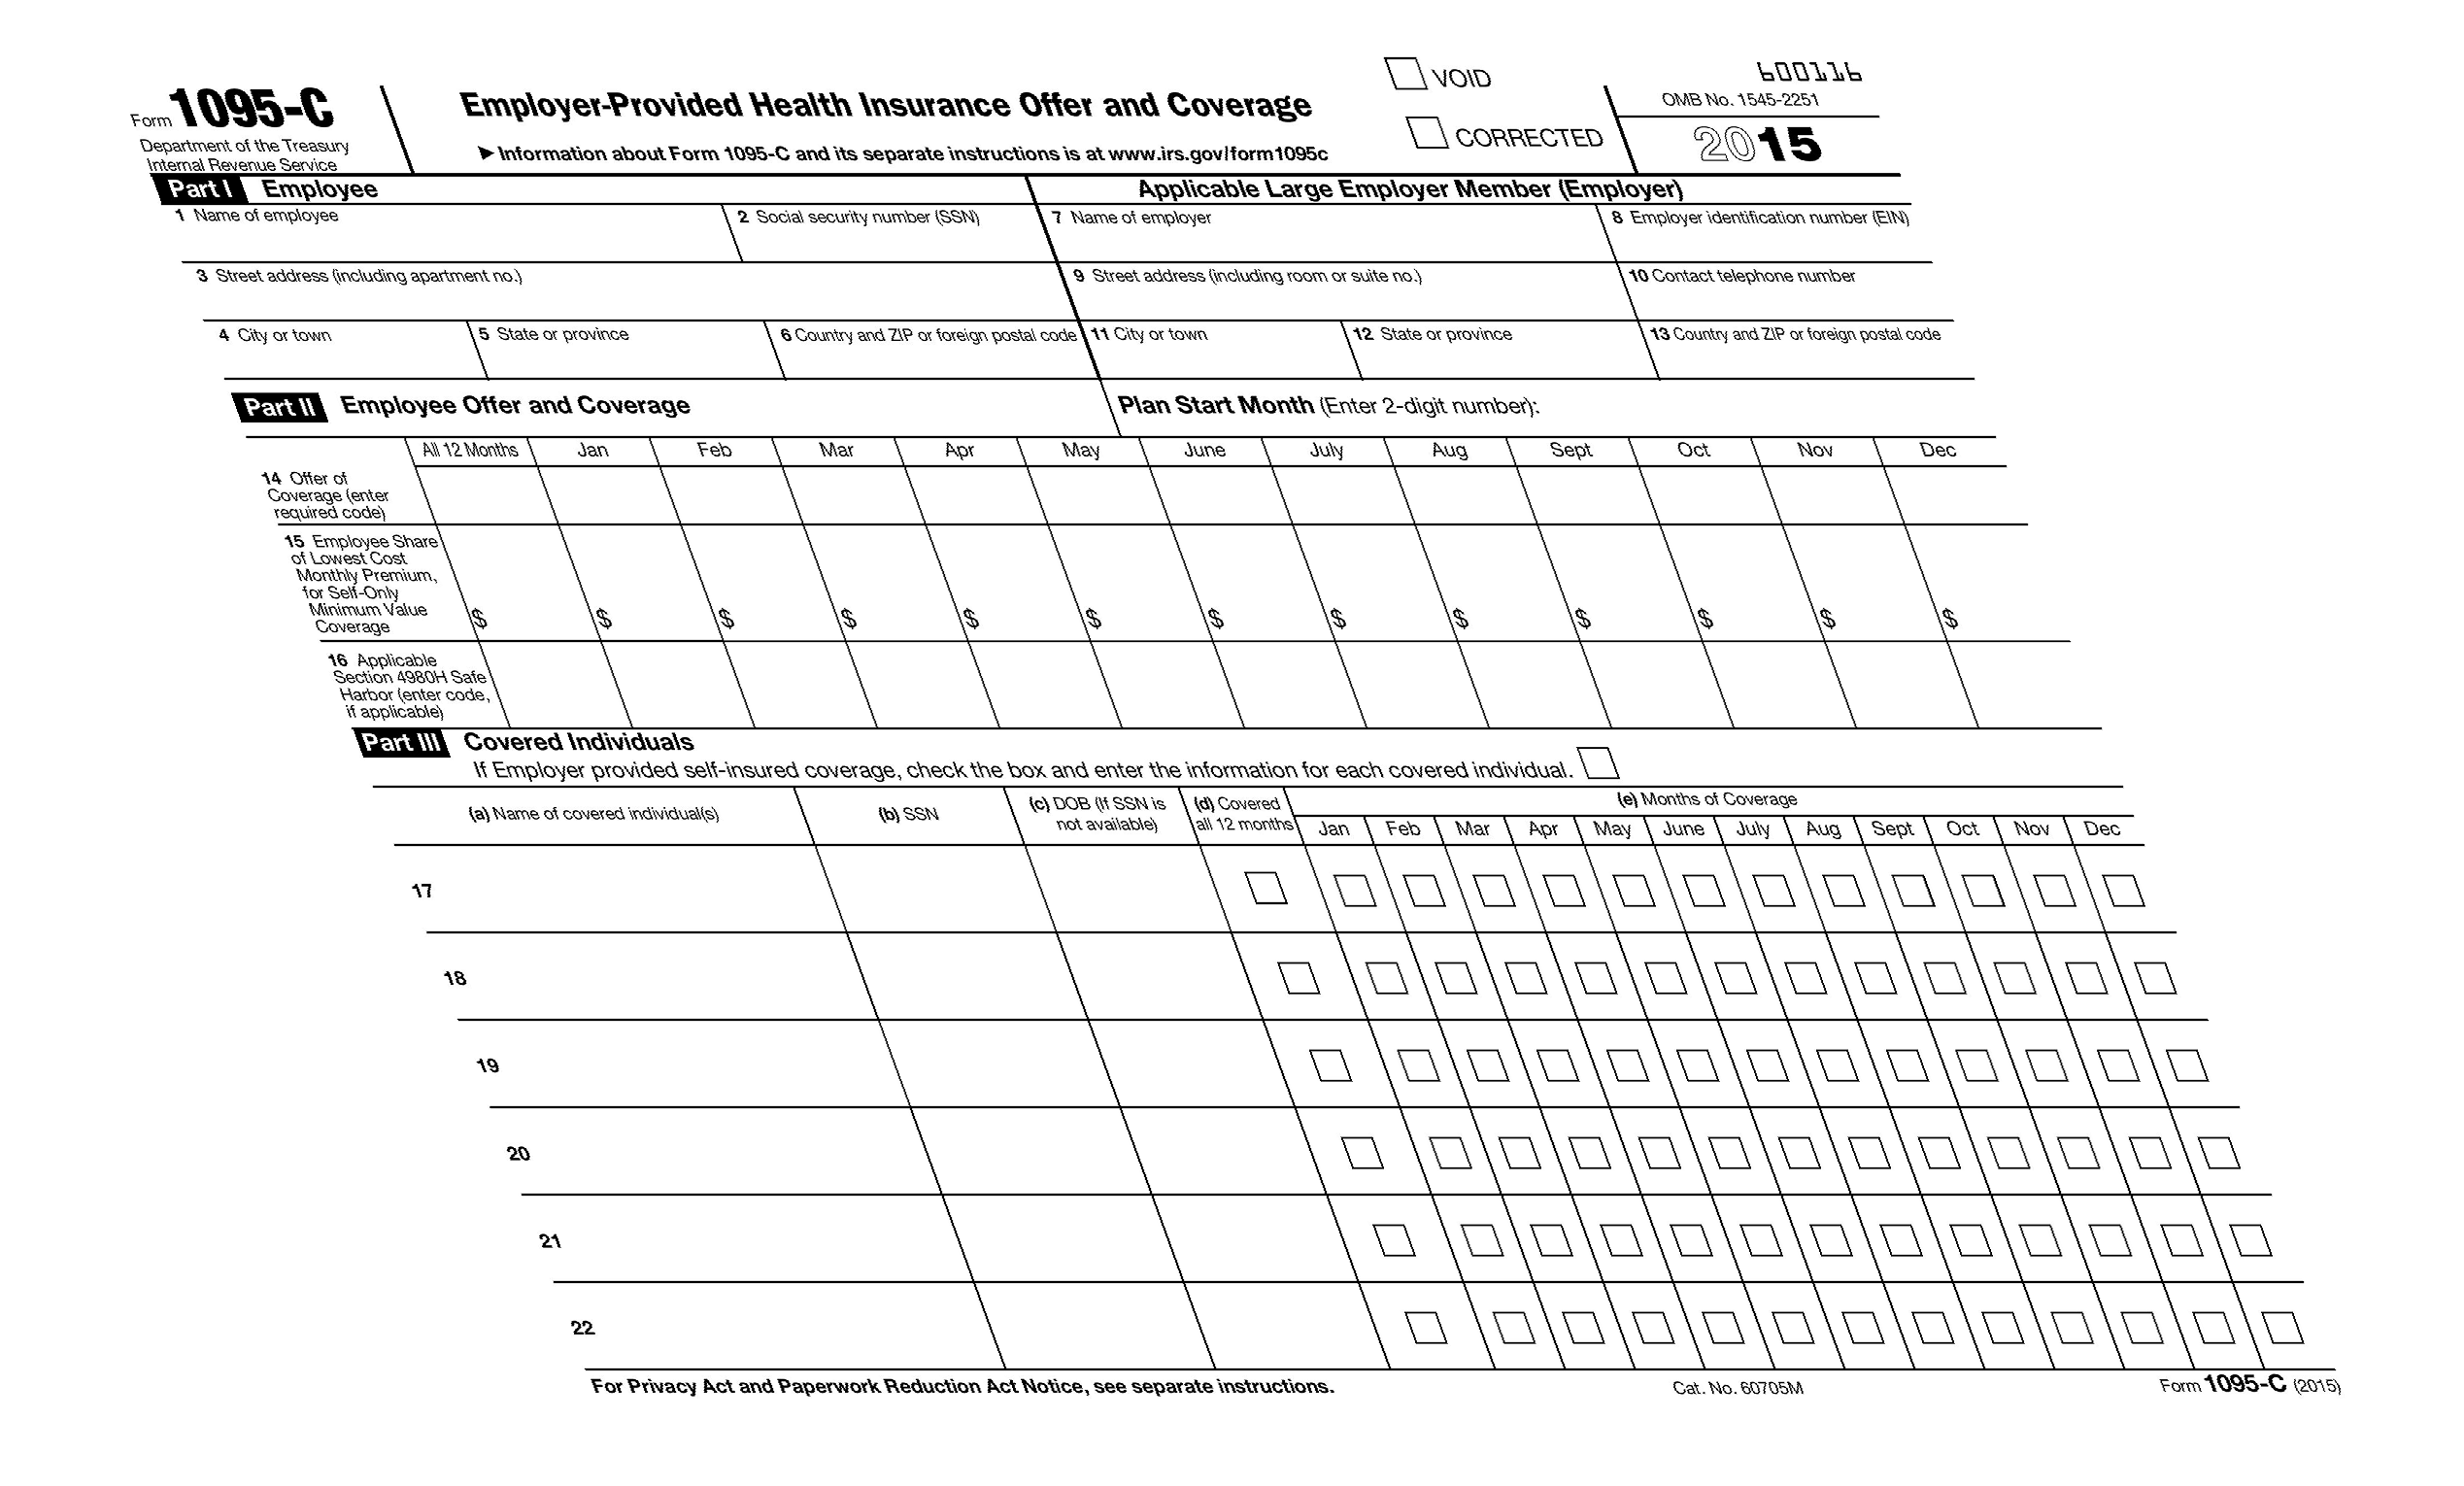 Online Delivery of W-2 Statement and Form 1095-C